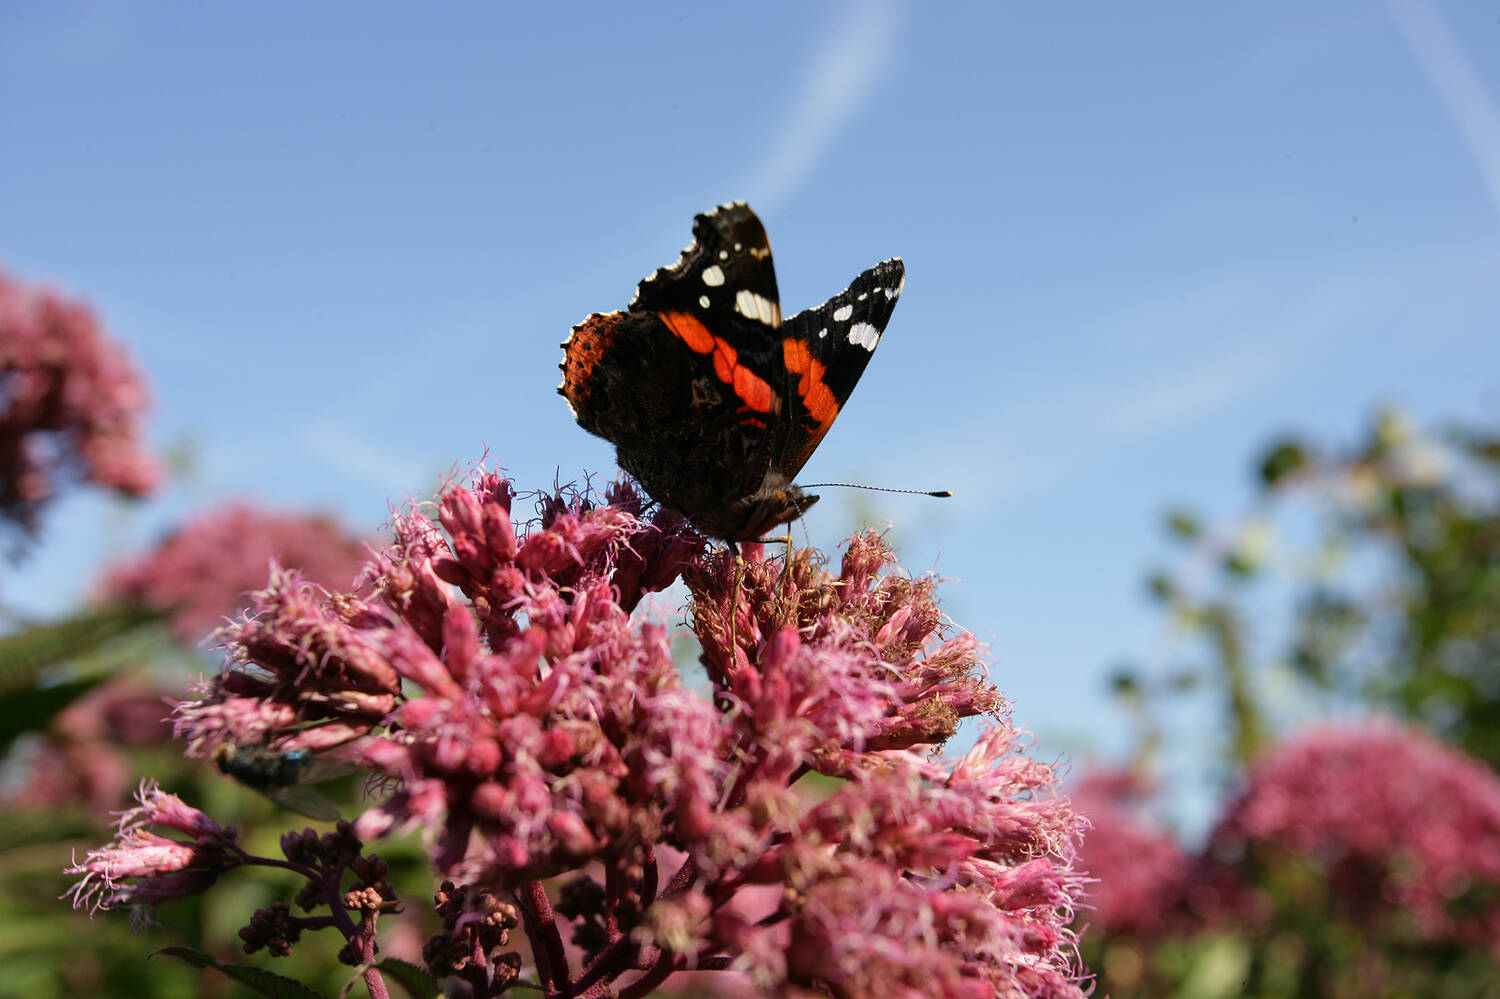 A red admiral butterfly perches on a pink flower in Kellie Castle Garden, with a blue sky in the background.